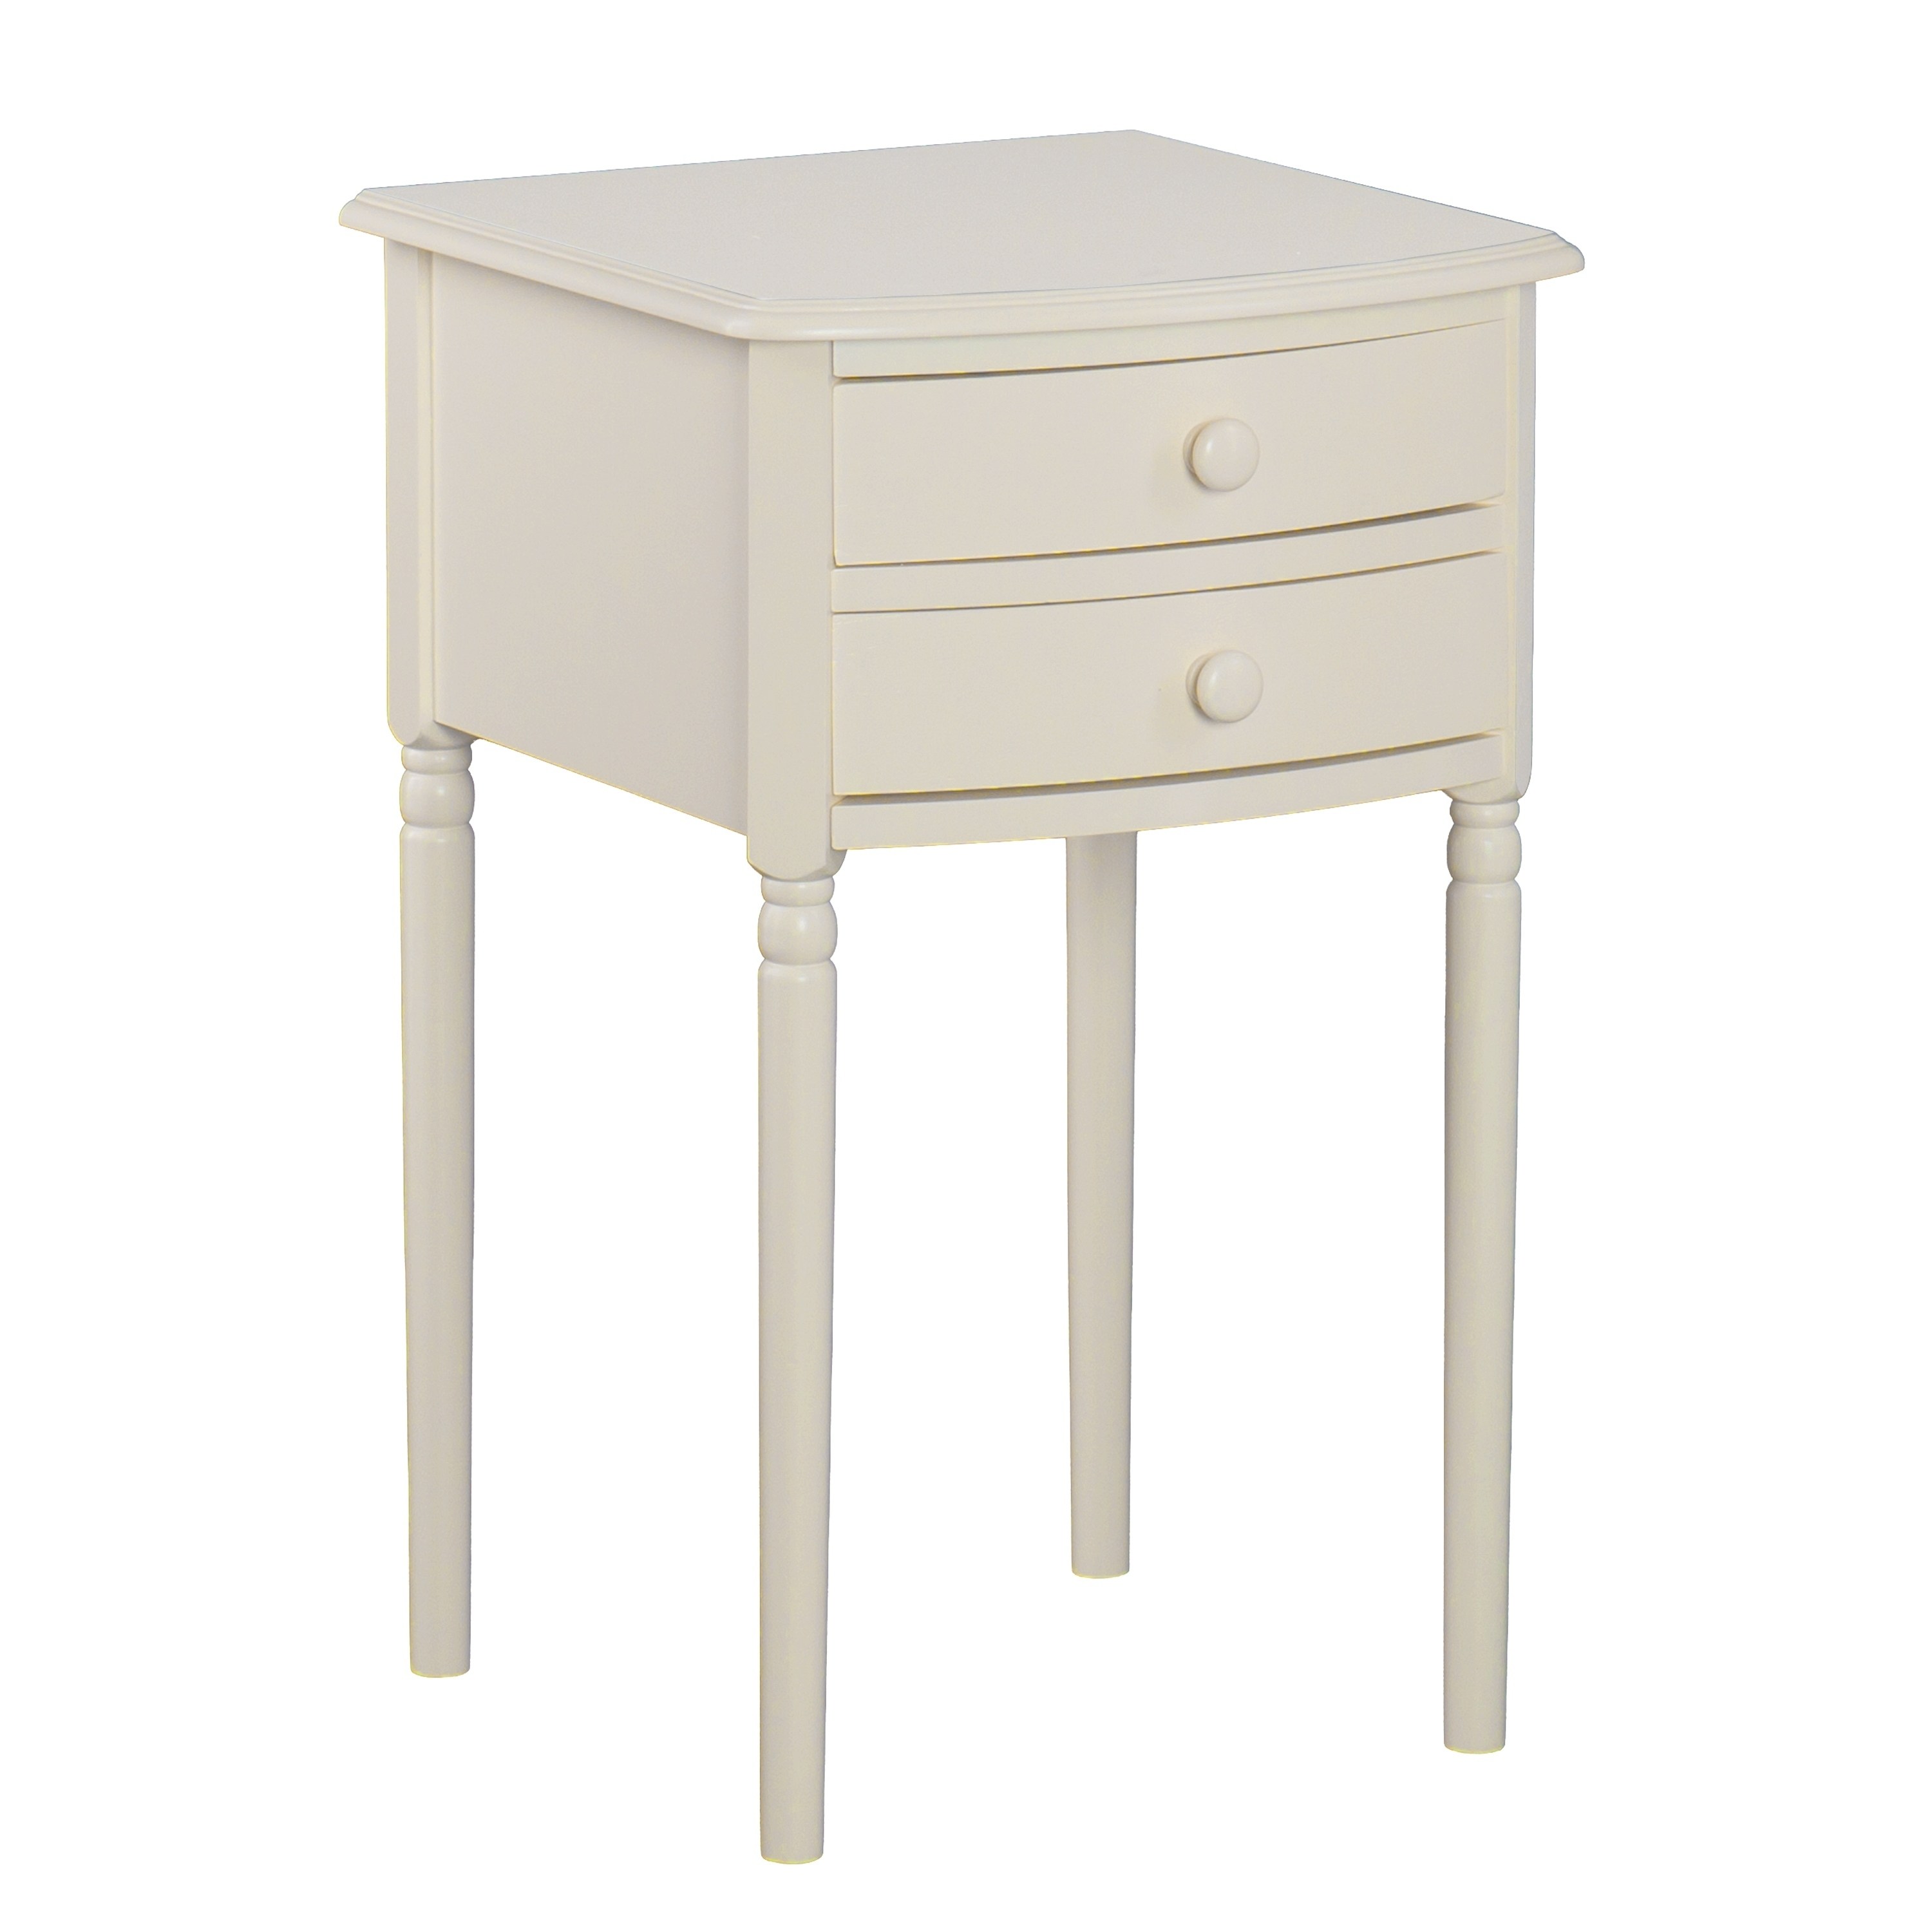 harper blvd davelon tall farmhouse accent table with storage free shipping today pub cloths inch high coffee narrow acrylic distressed console drum side target campaign teen desk